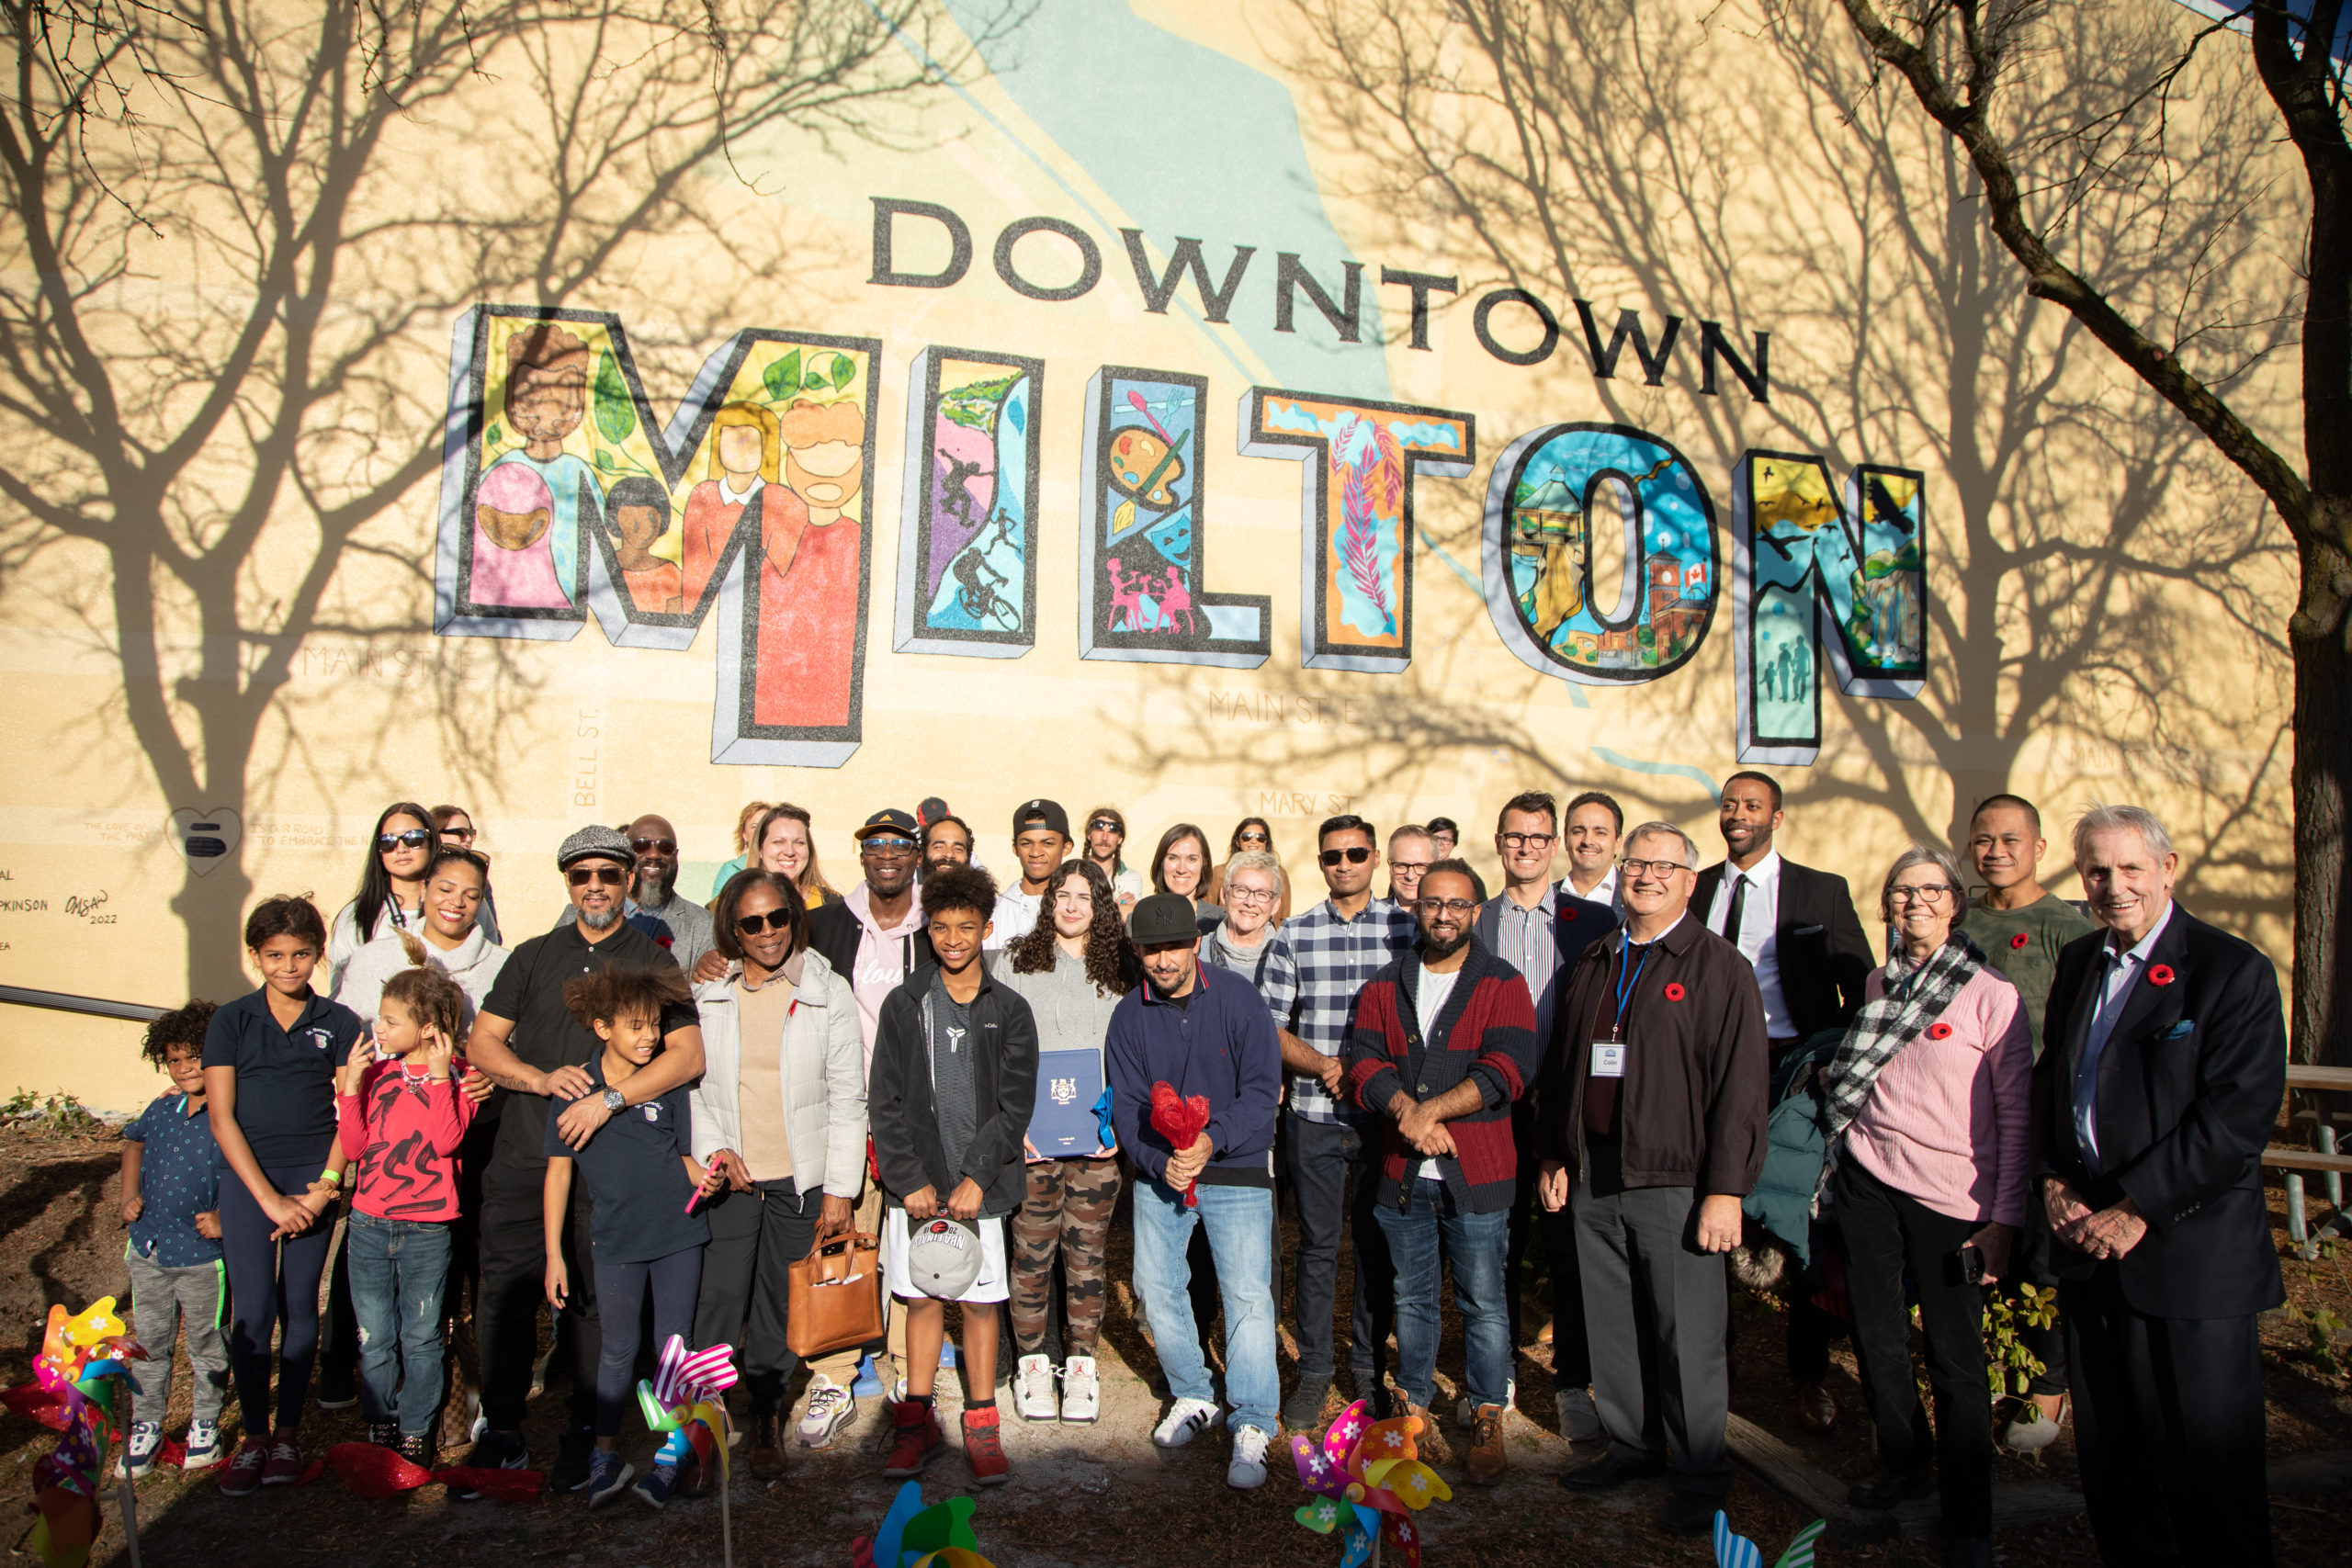 Community members gathered for a group photo in front of a Downtown Milton mural